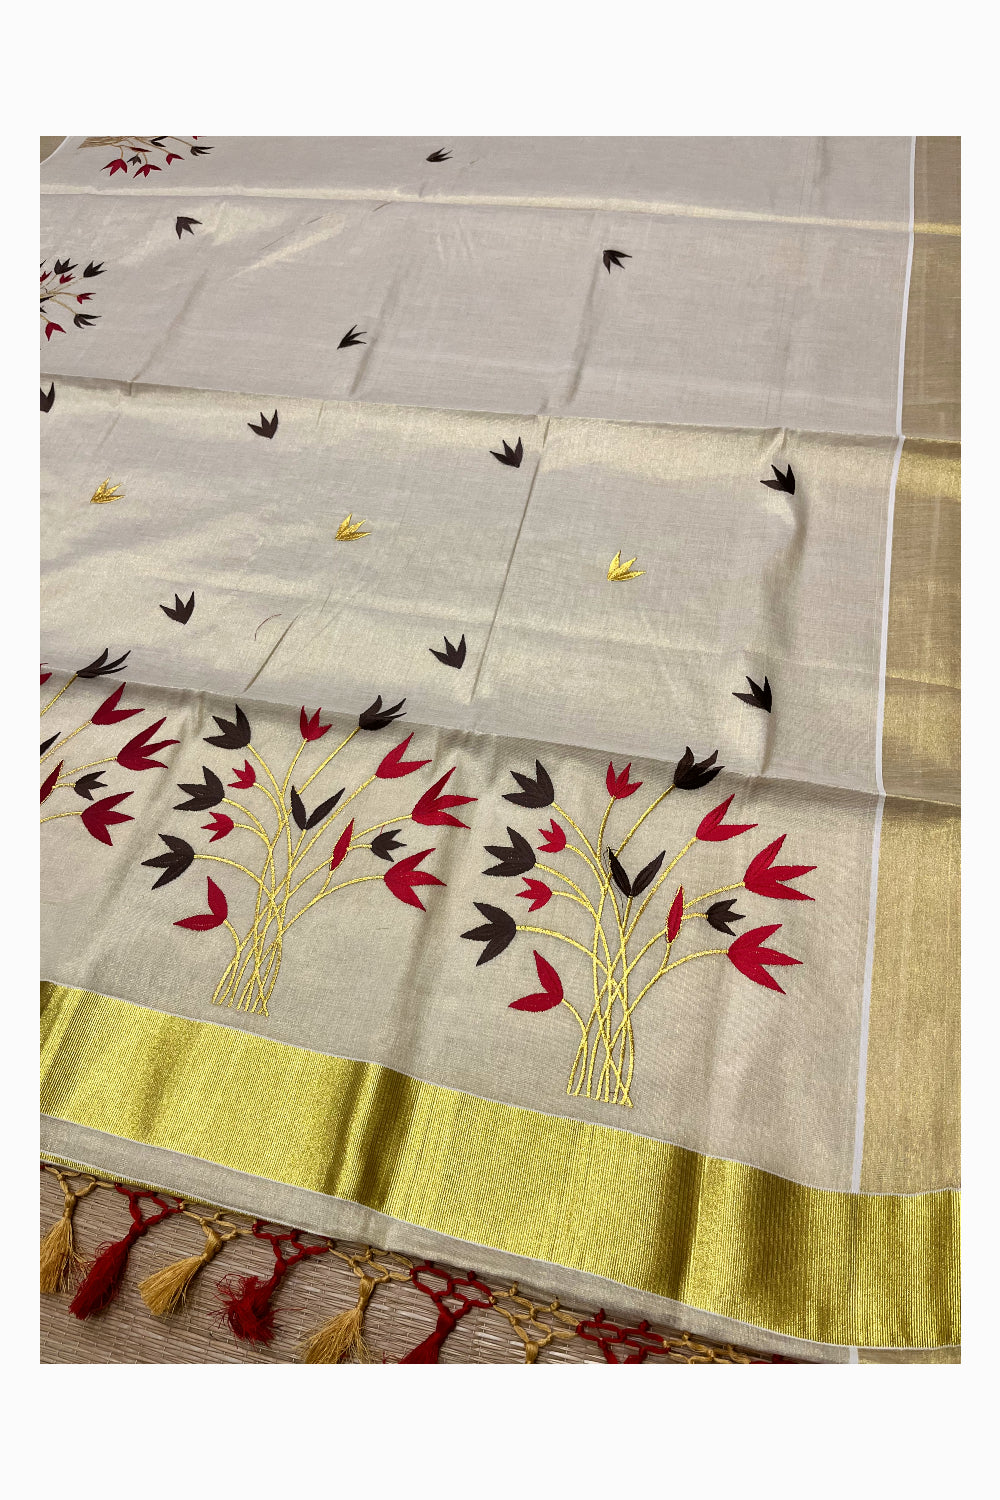 Kerala Tissue Kasavu Saree with Red And Brown Floral Embroidery Works